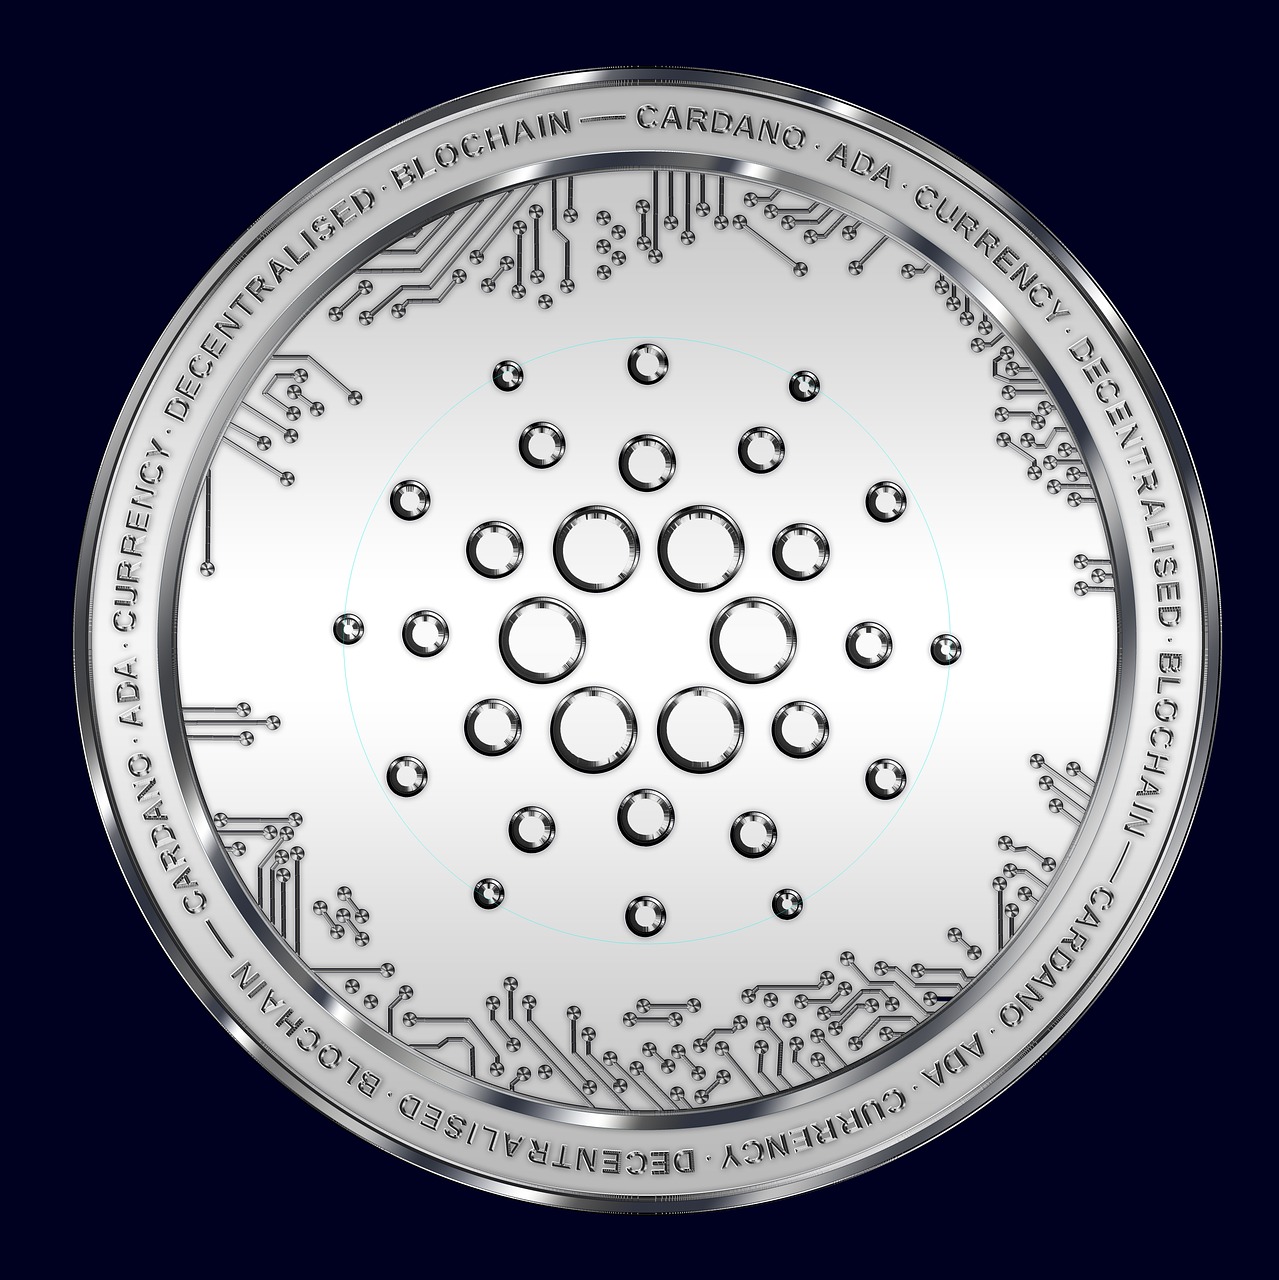 On-Chain Data Suggests Cardano Is Growing Rapidly